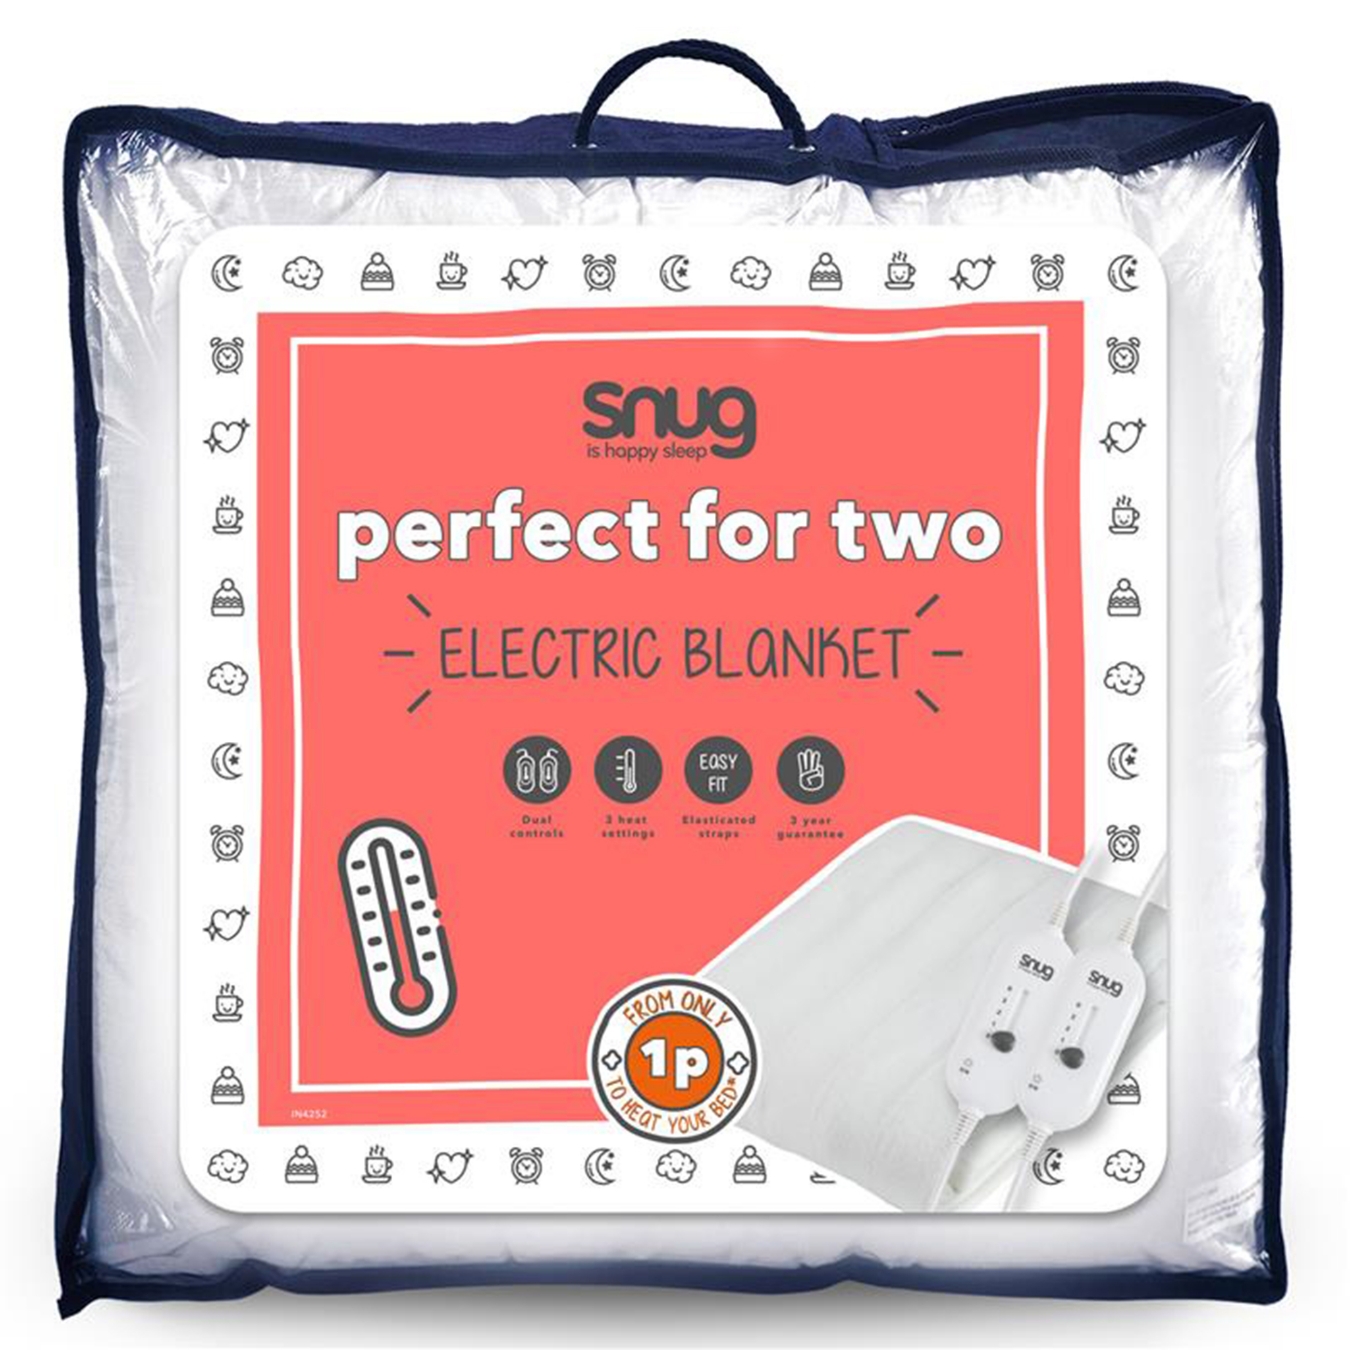 View Snug Snuggle Up Perfect for Two Electric Blanket King information